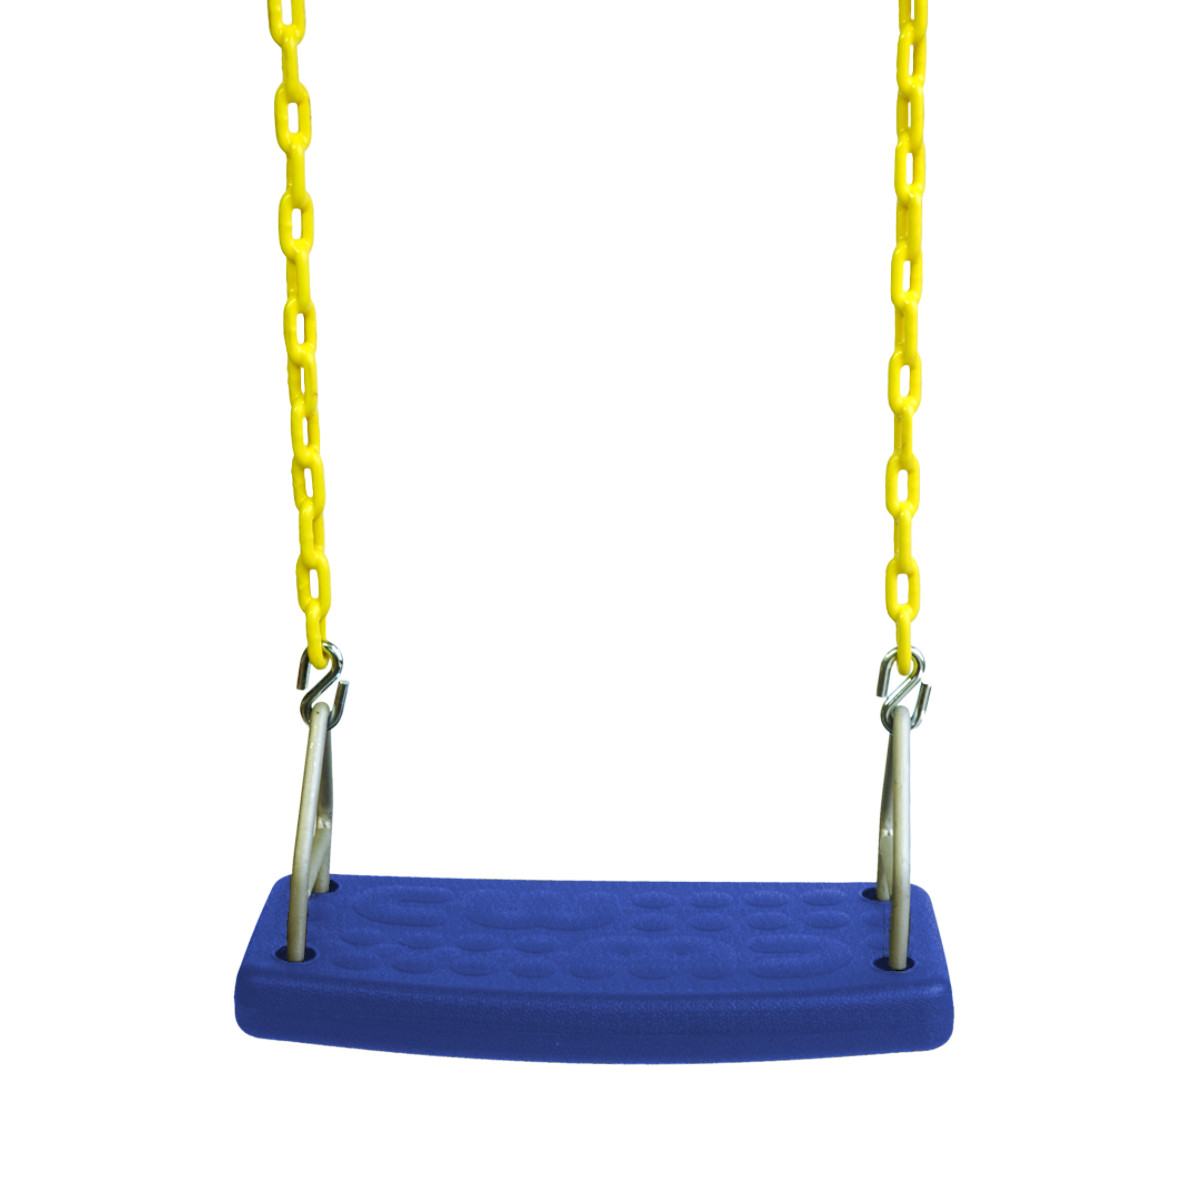 Molded Flat Swing Seat with 5'6" Heavy Duty Chain (S-177)